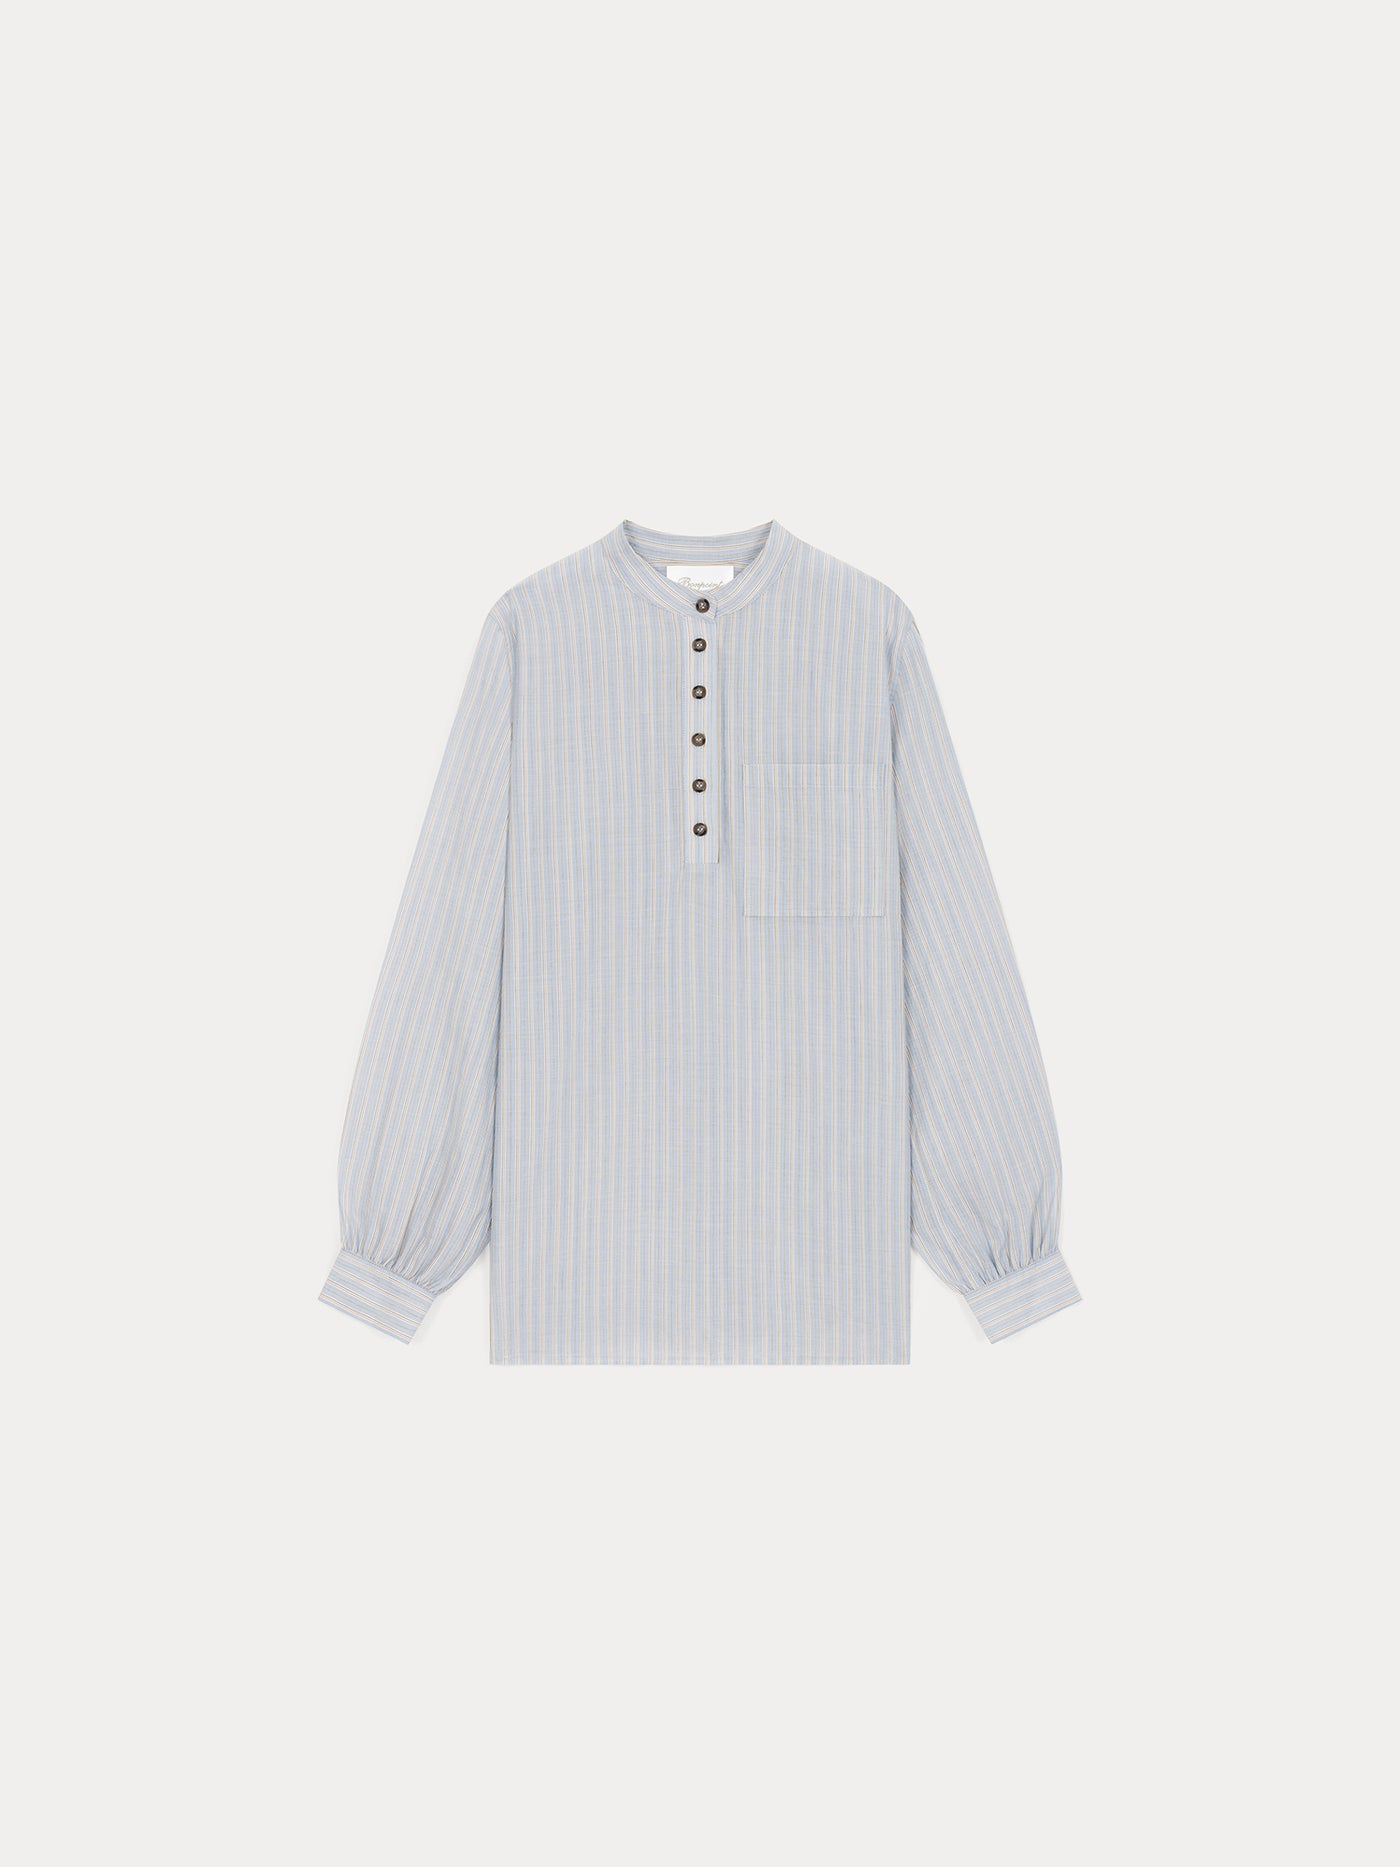 Sky blue striped shirt in cotton